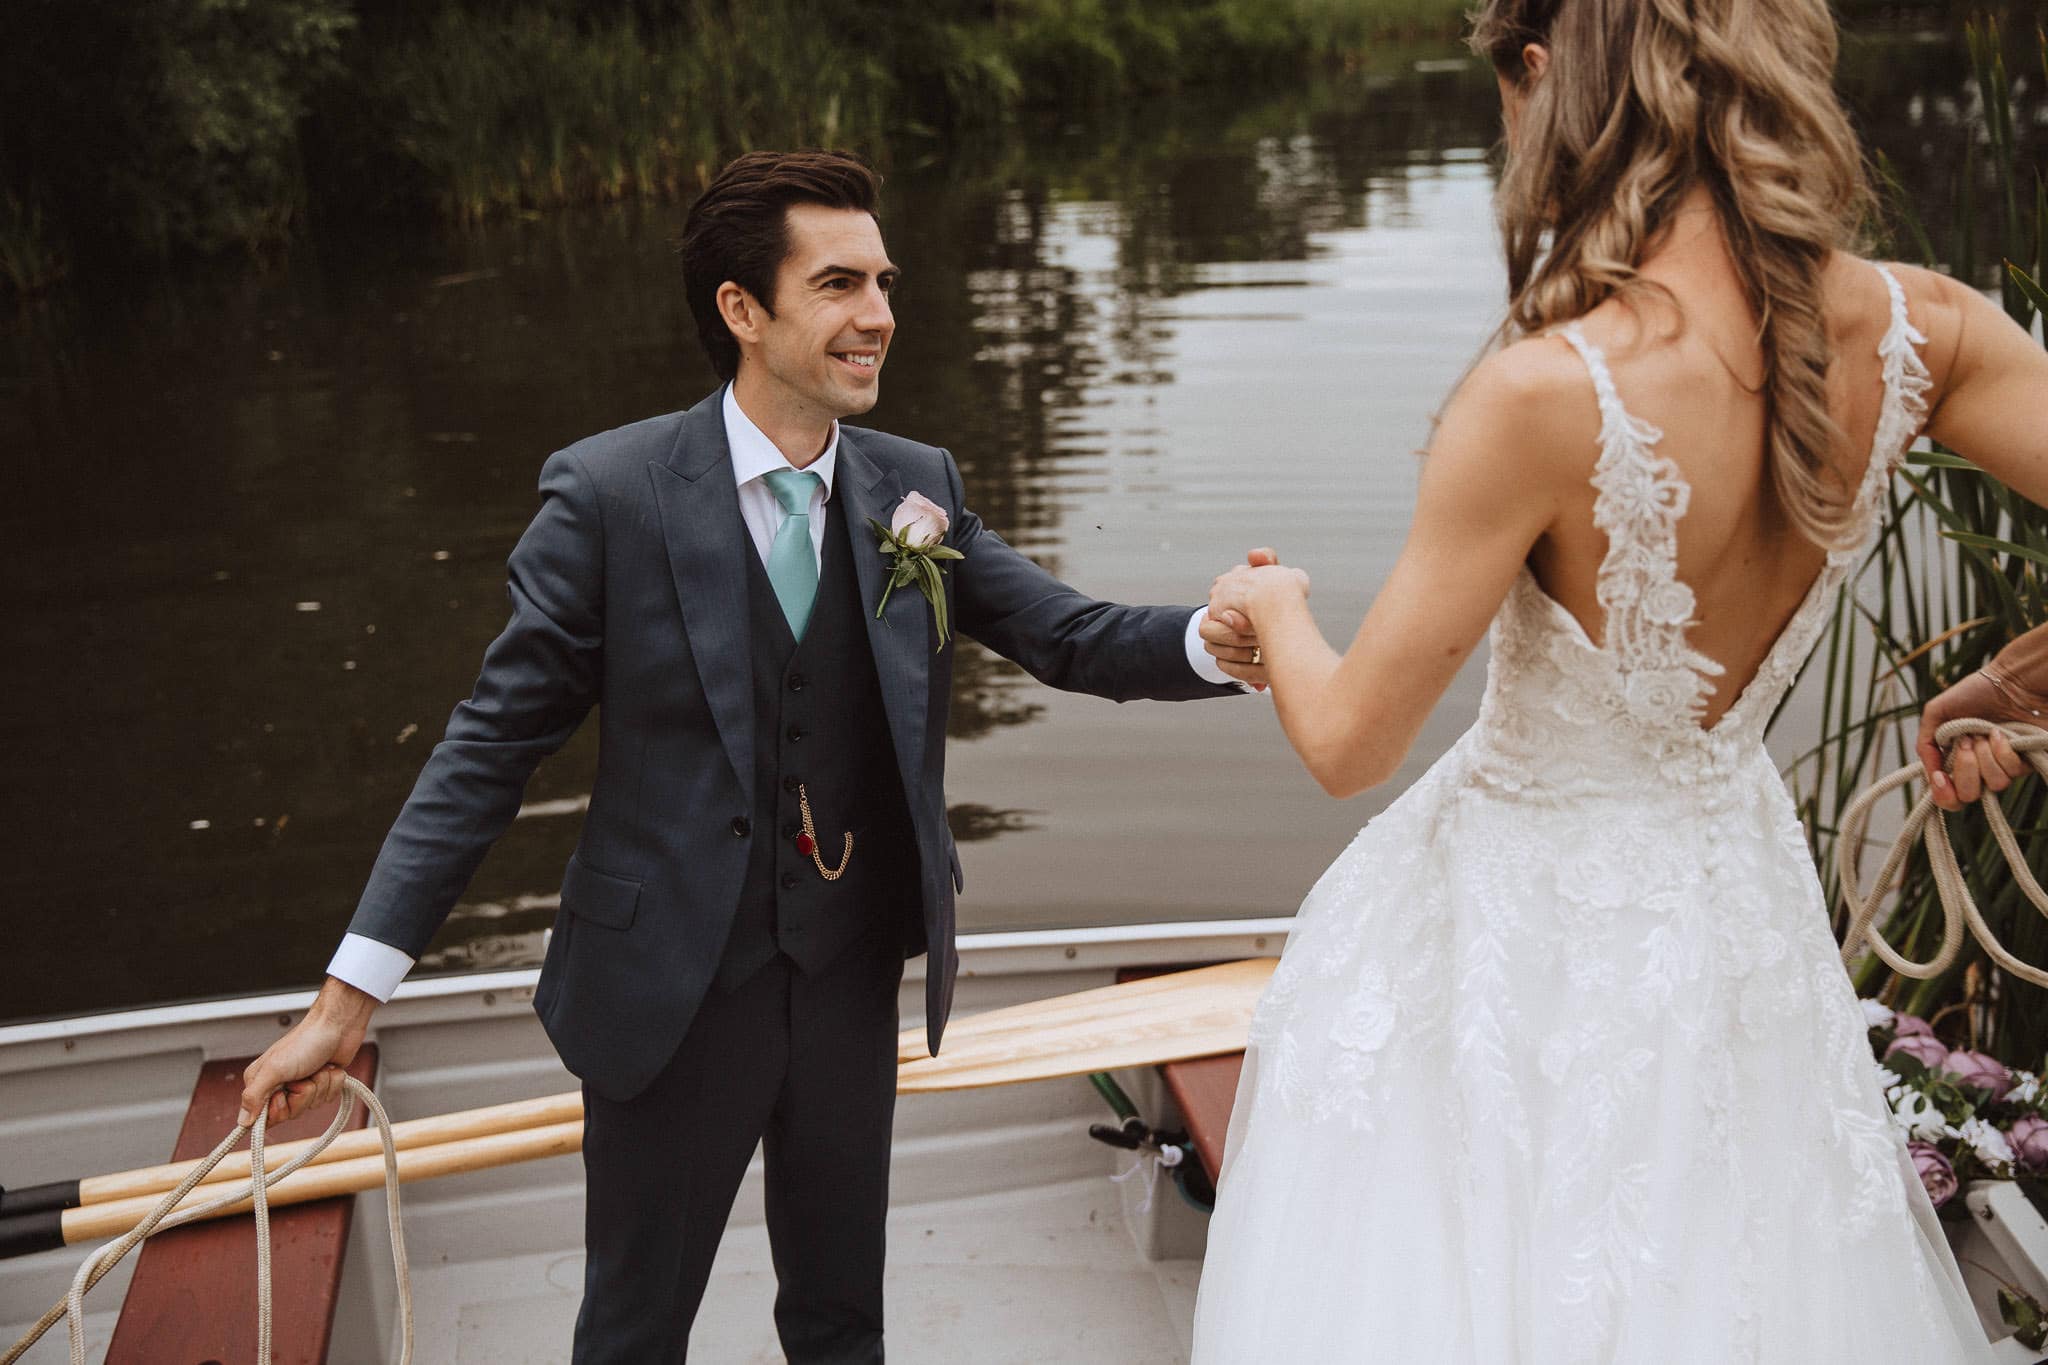 wedding by the lake at the bride's home in Leicestershire